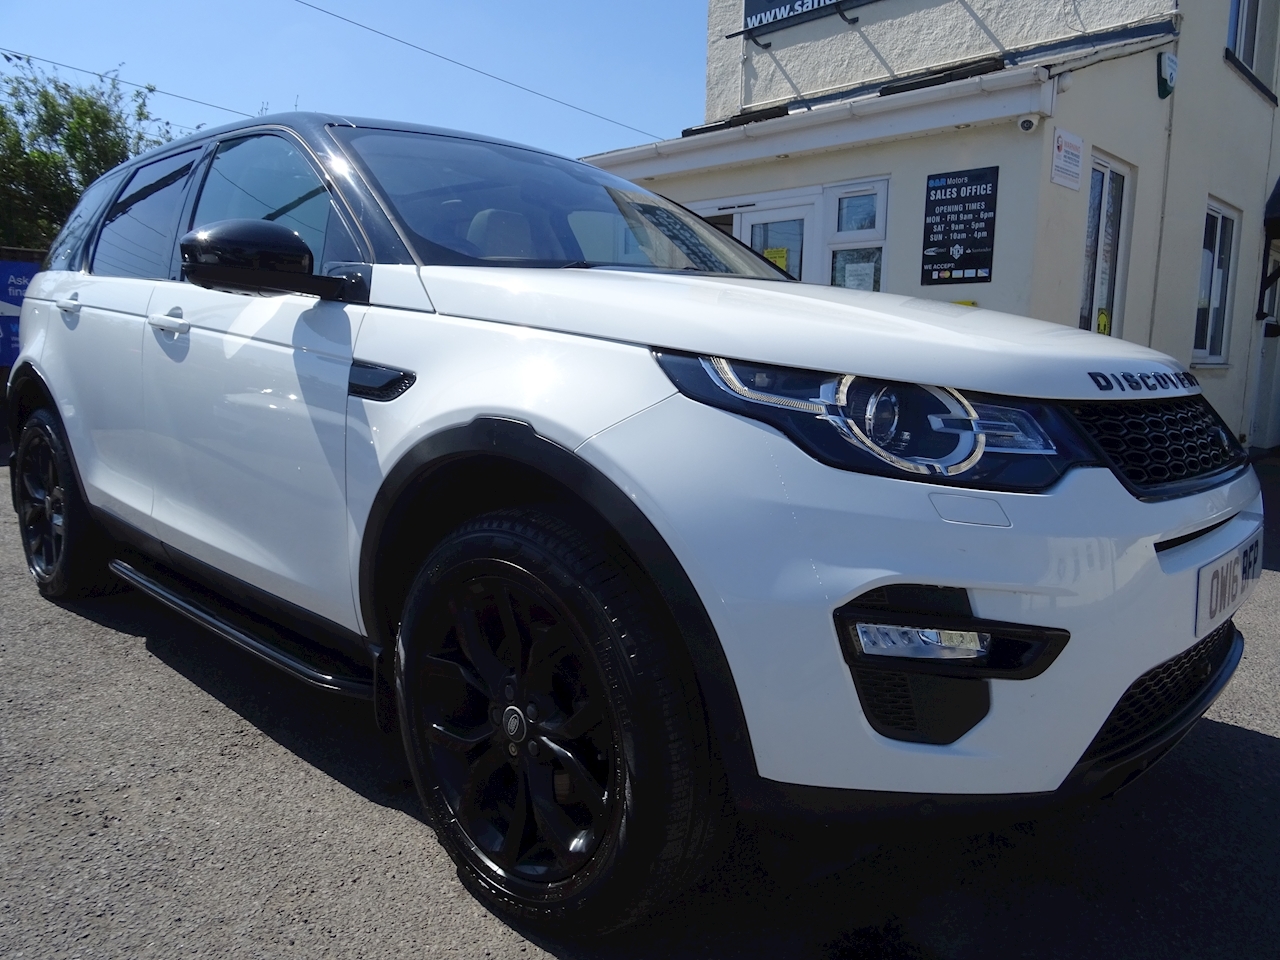 2.0 TD4 HSE SUV 5dr Diesel Auto 4WD (s/s) (180 ps)